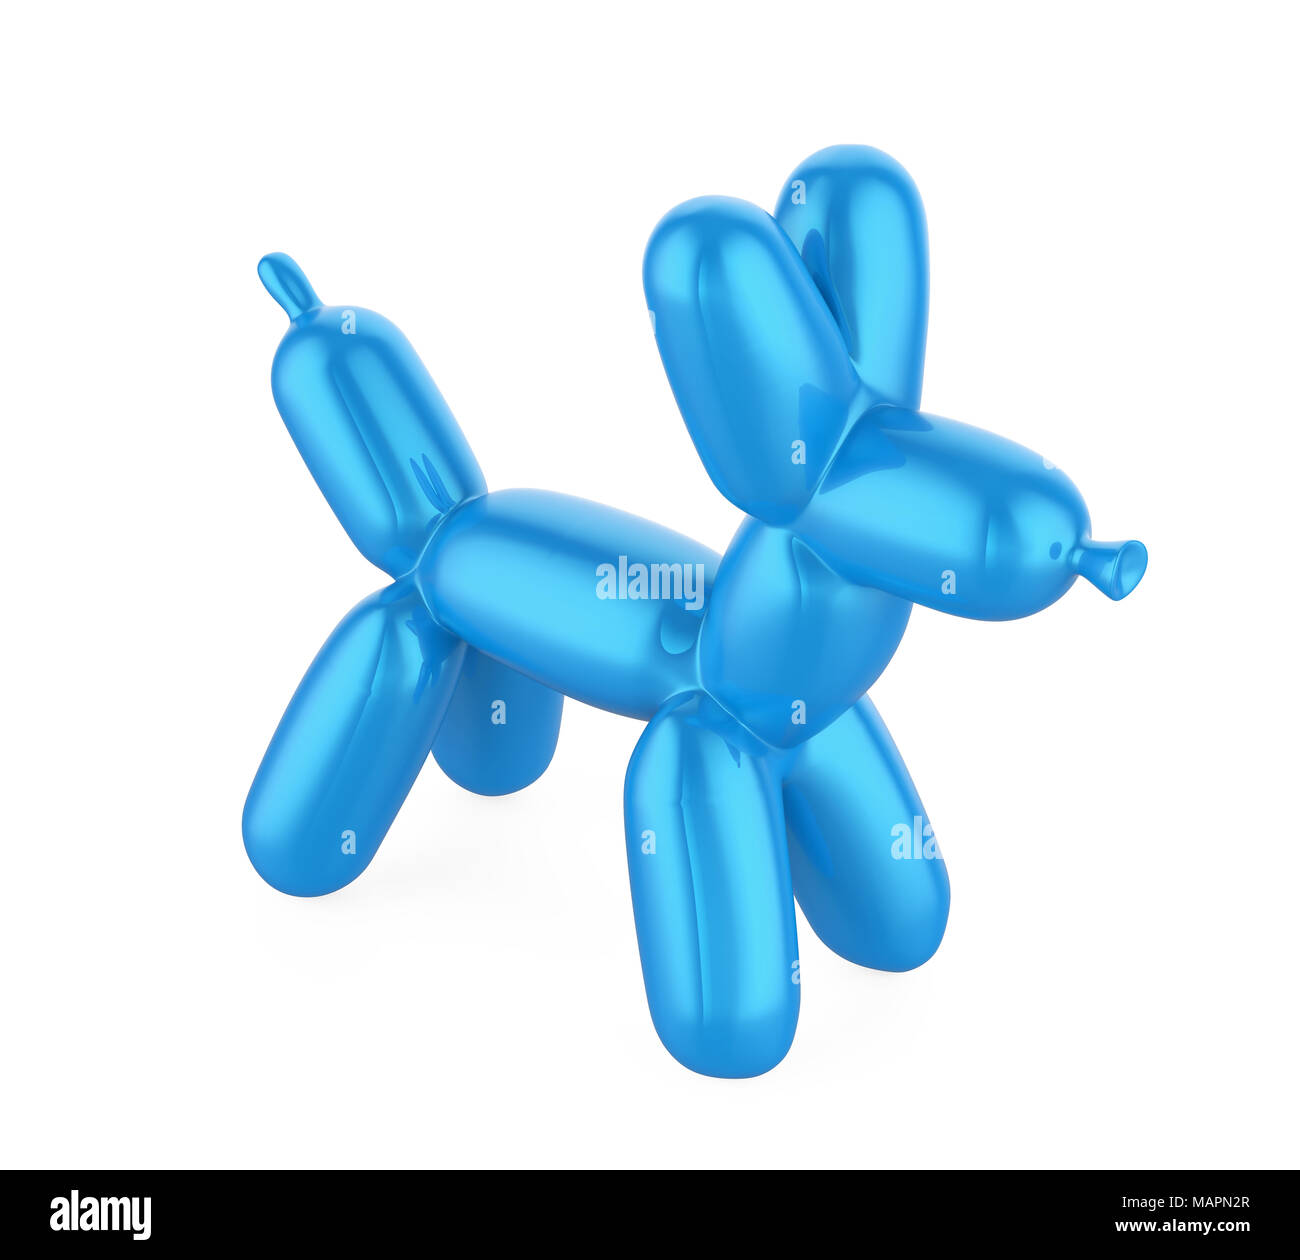 Balloon Dog Isolated Banque D'Images